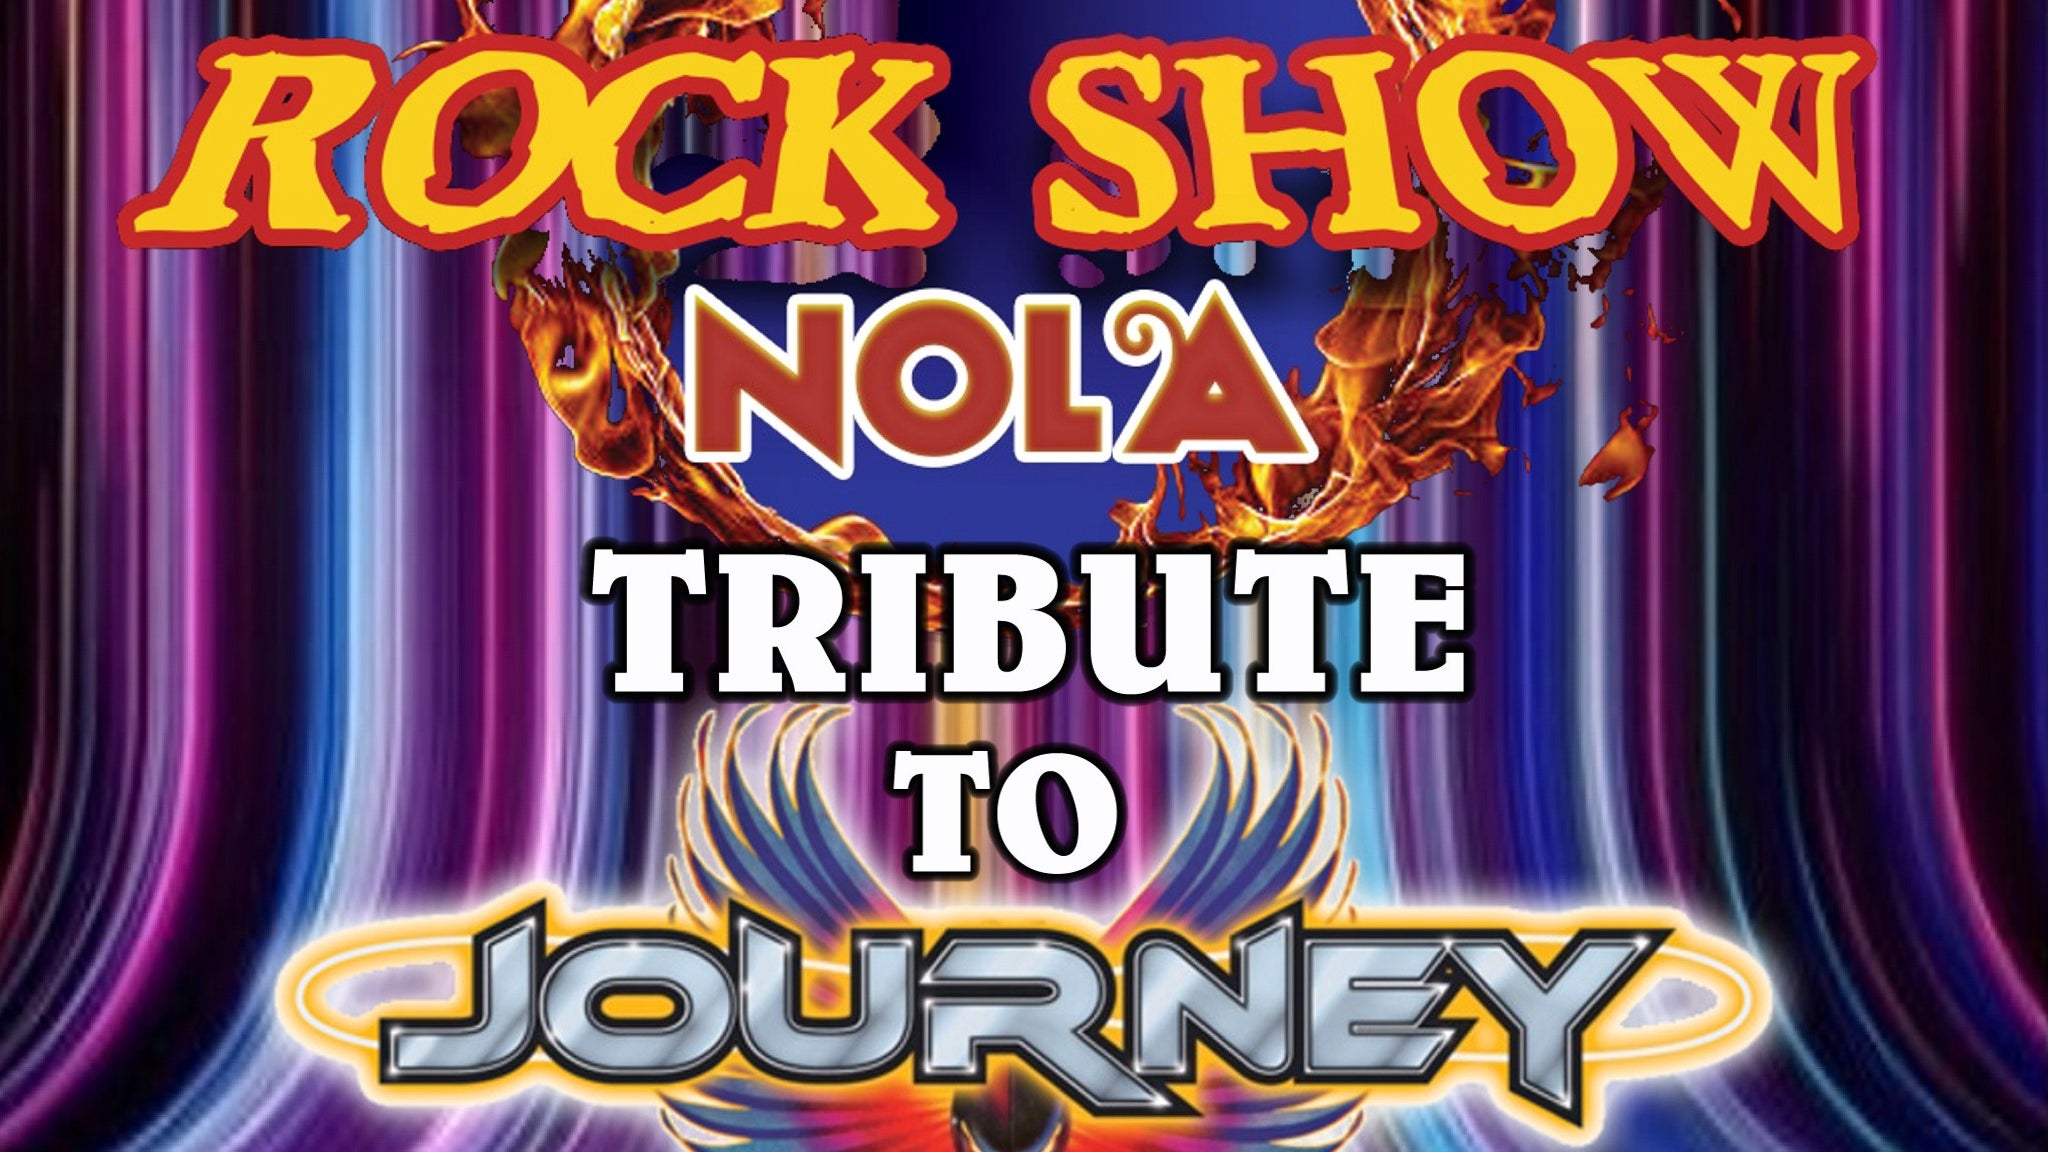 Rock Show NOLA - The Ultimate Tribute to Journey  